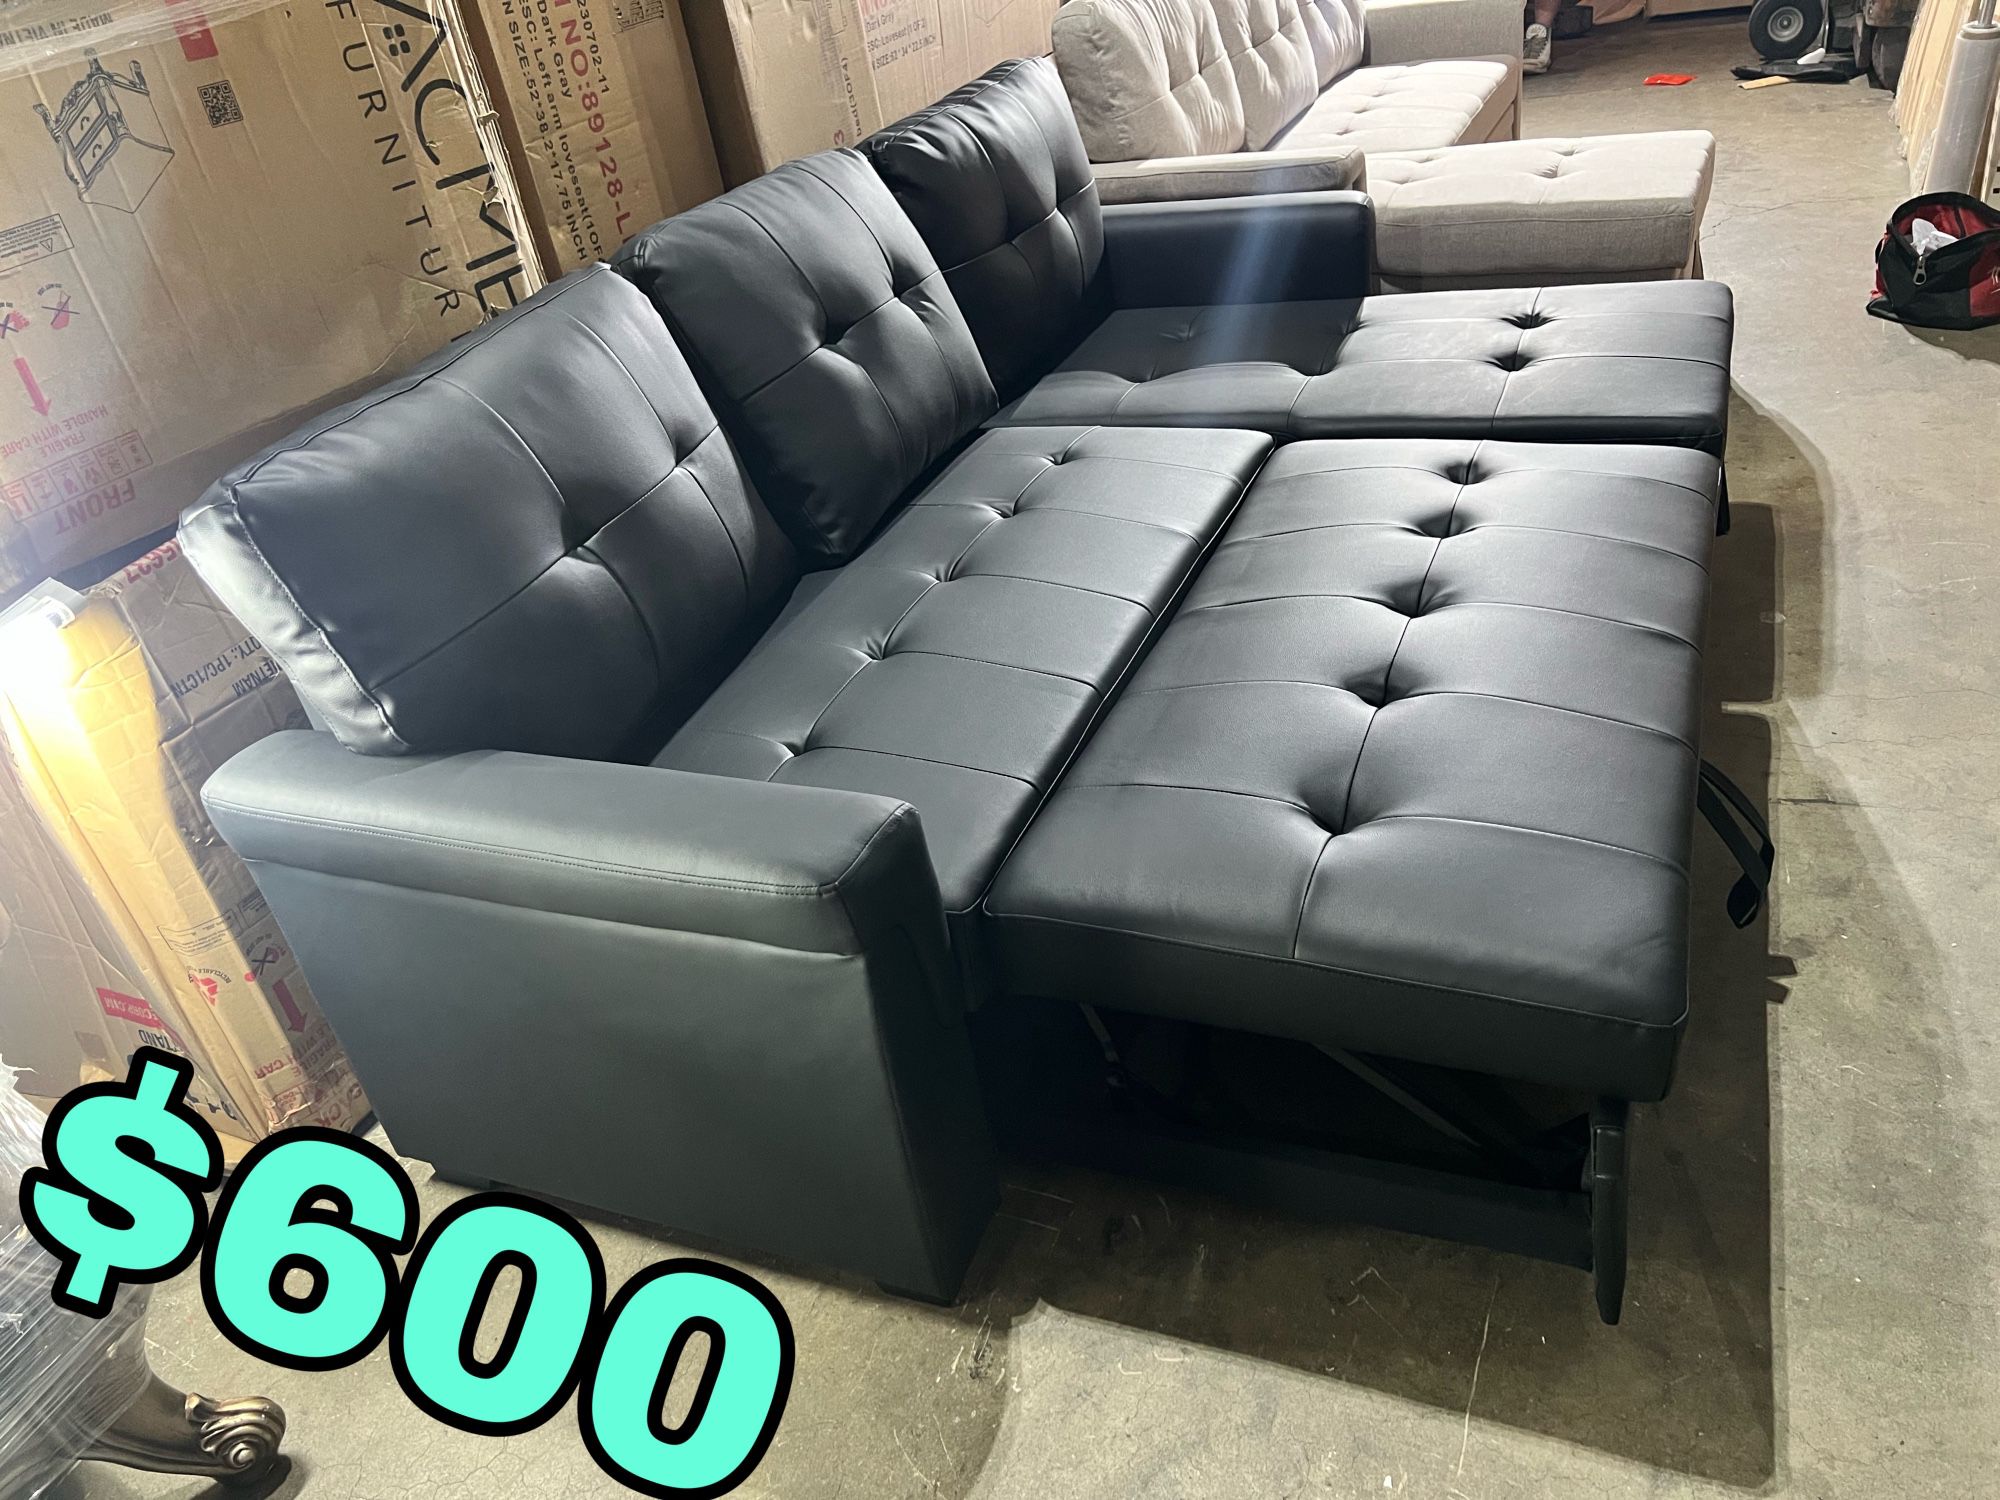 Beautiful New Sectional Sofa Bed W/ Reversible Storage Chaise in Black Leather Only $600!!!